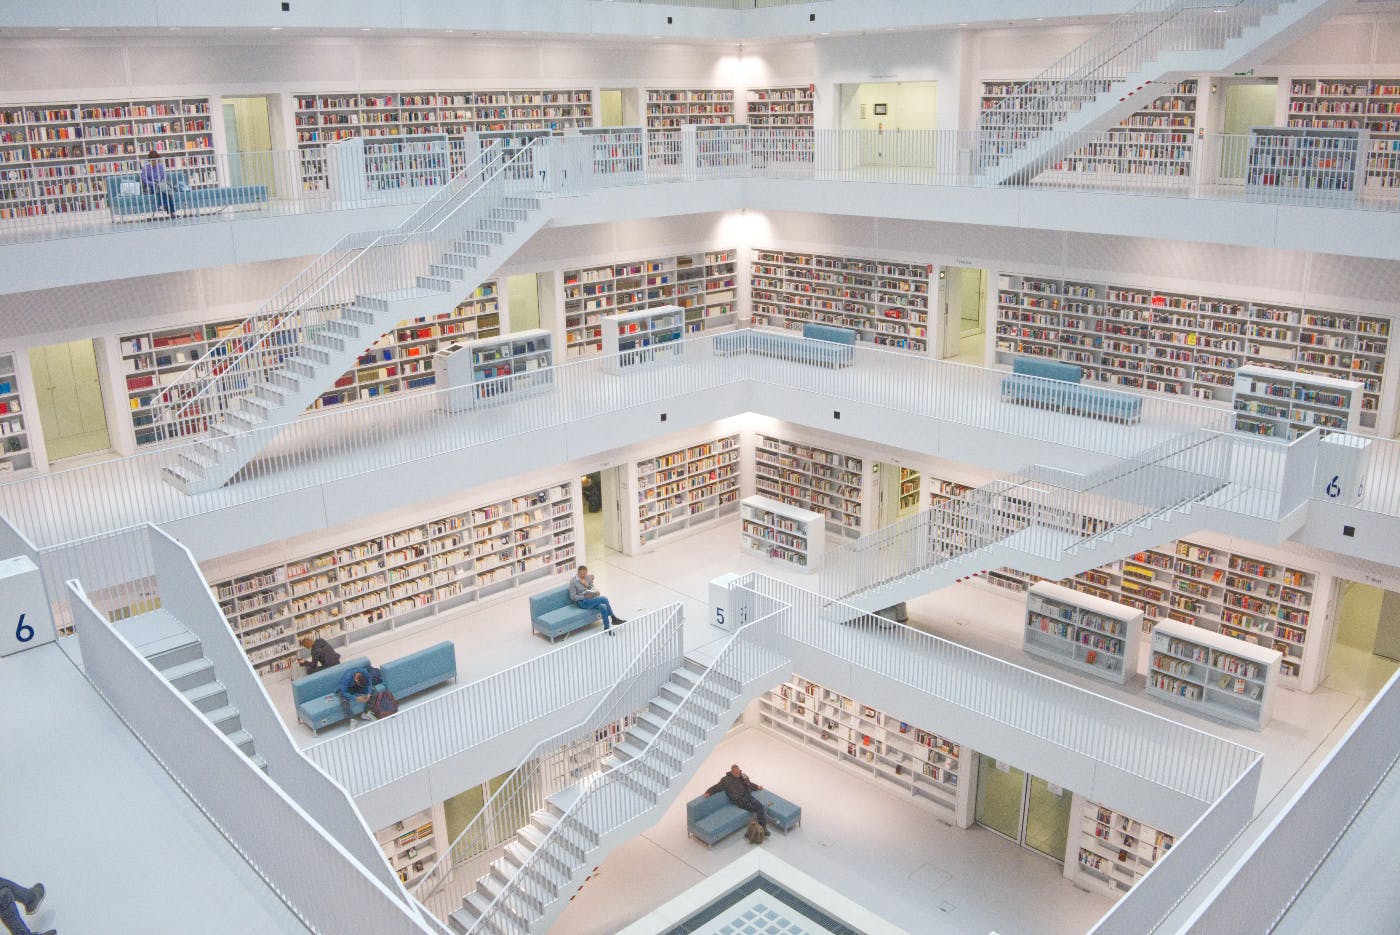 A library with white walls and stairs People sitting on benches reading.